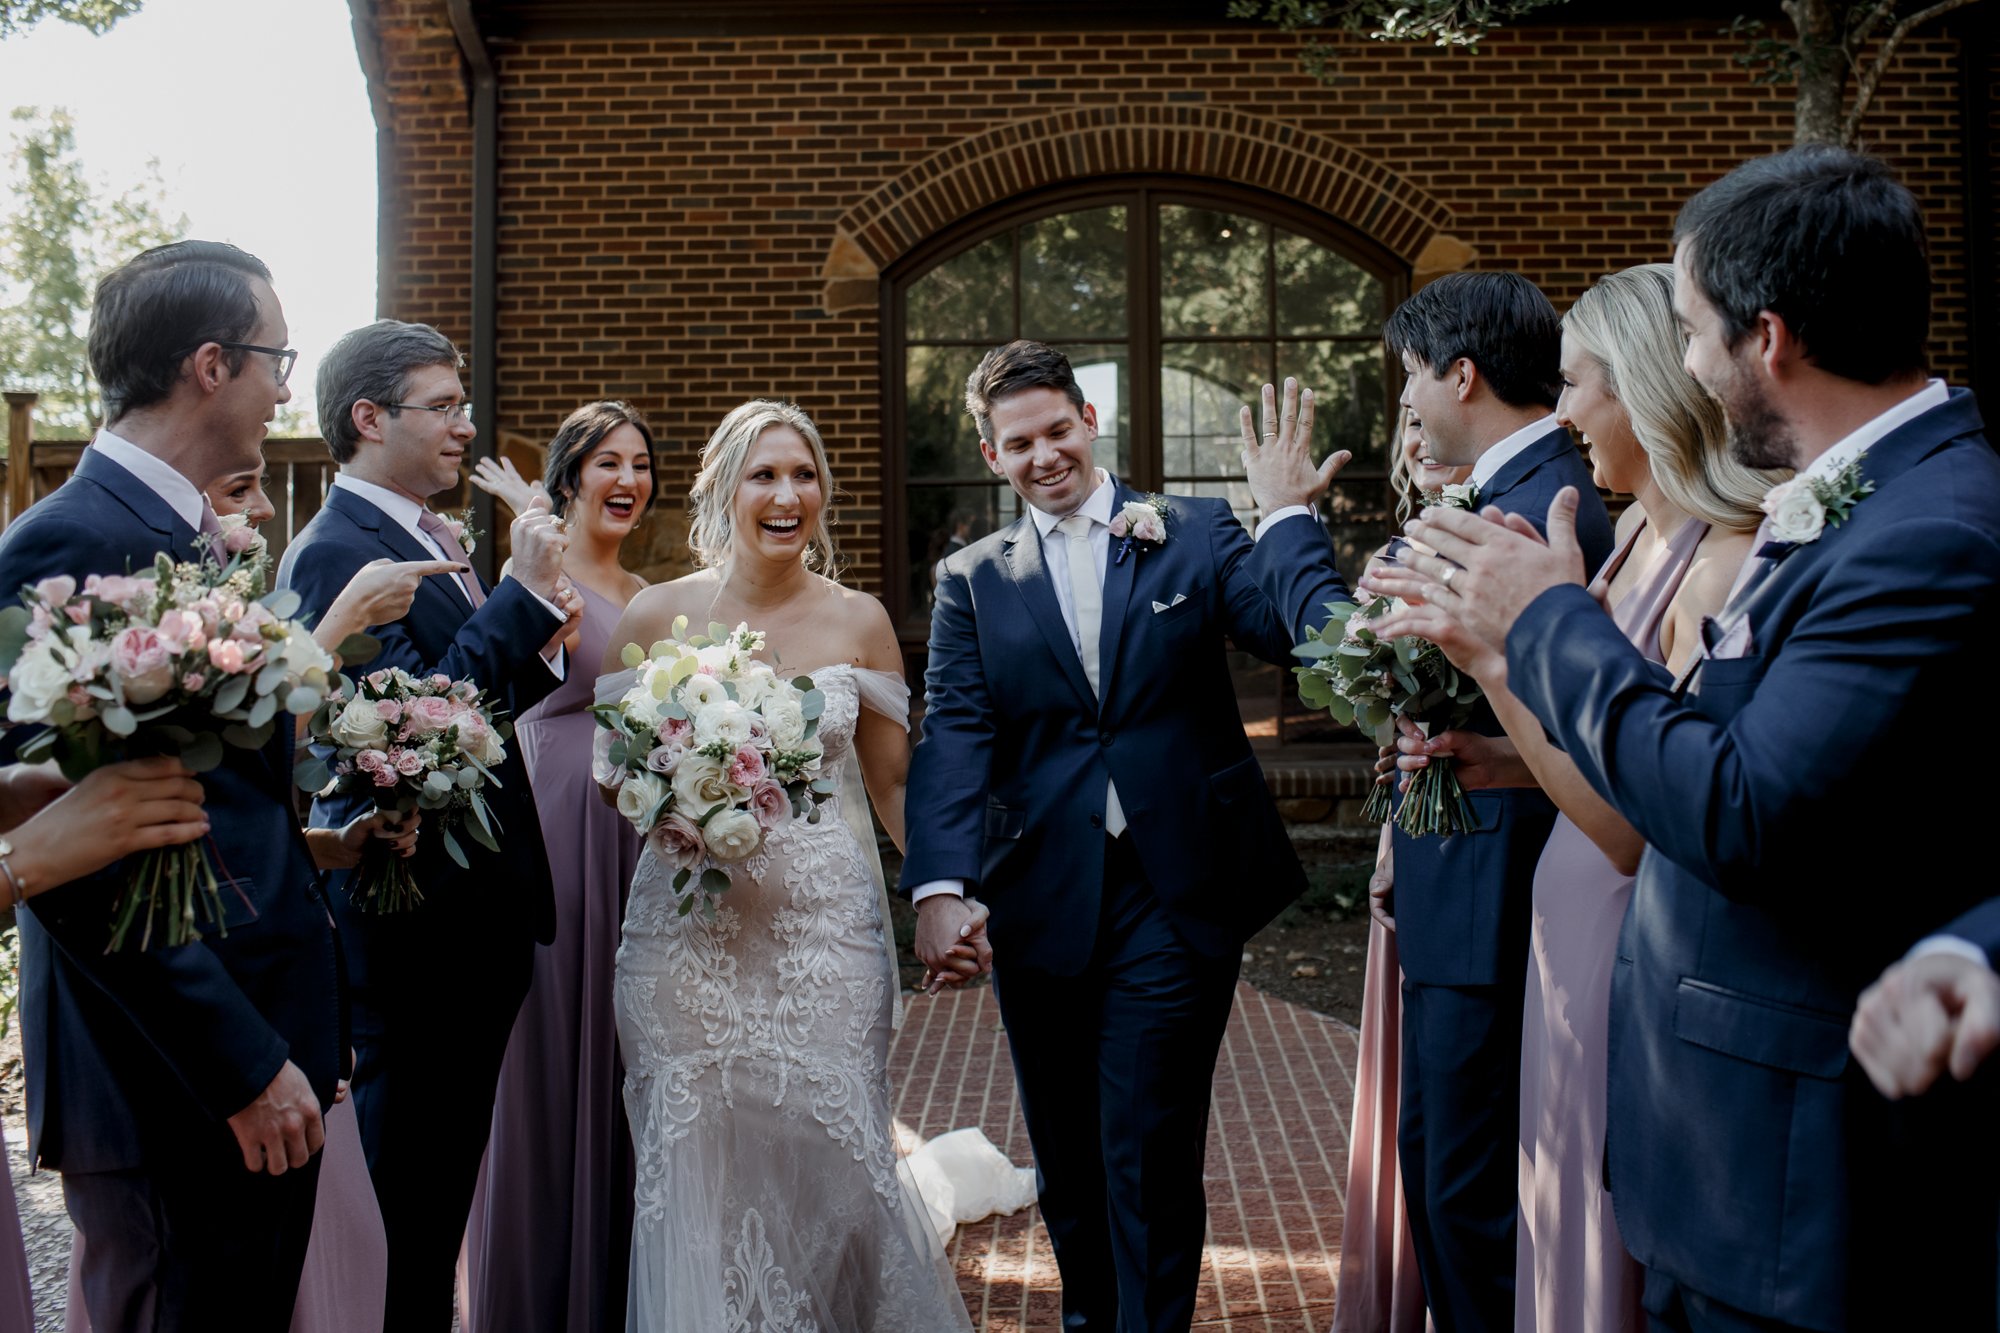 Bride and groom portraits with bridal party. Elegant and Glamorous Uptown Wedding at Omni Houston Hotel and The Wynden